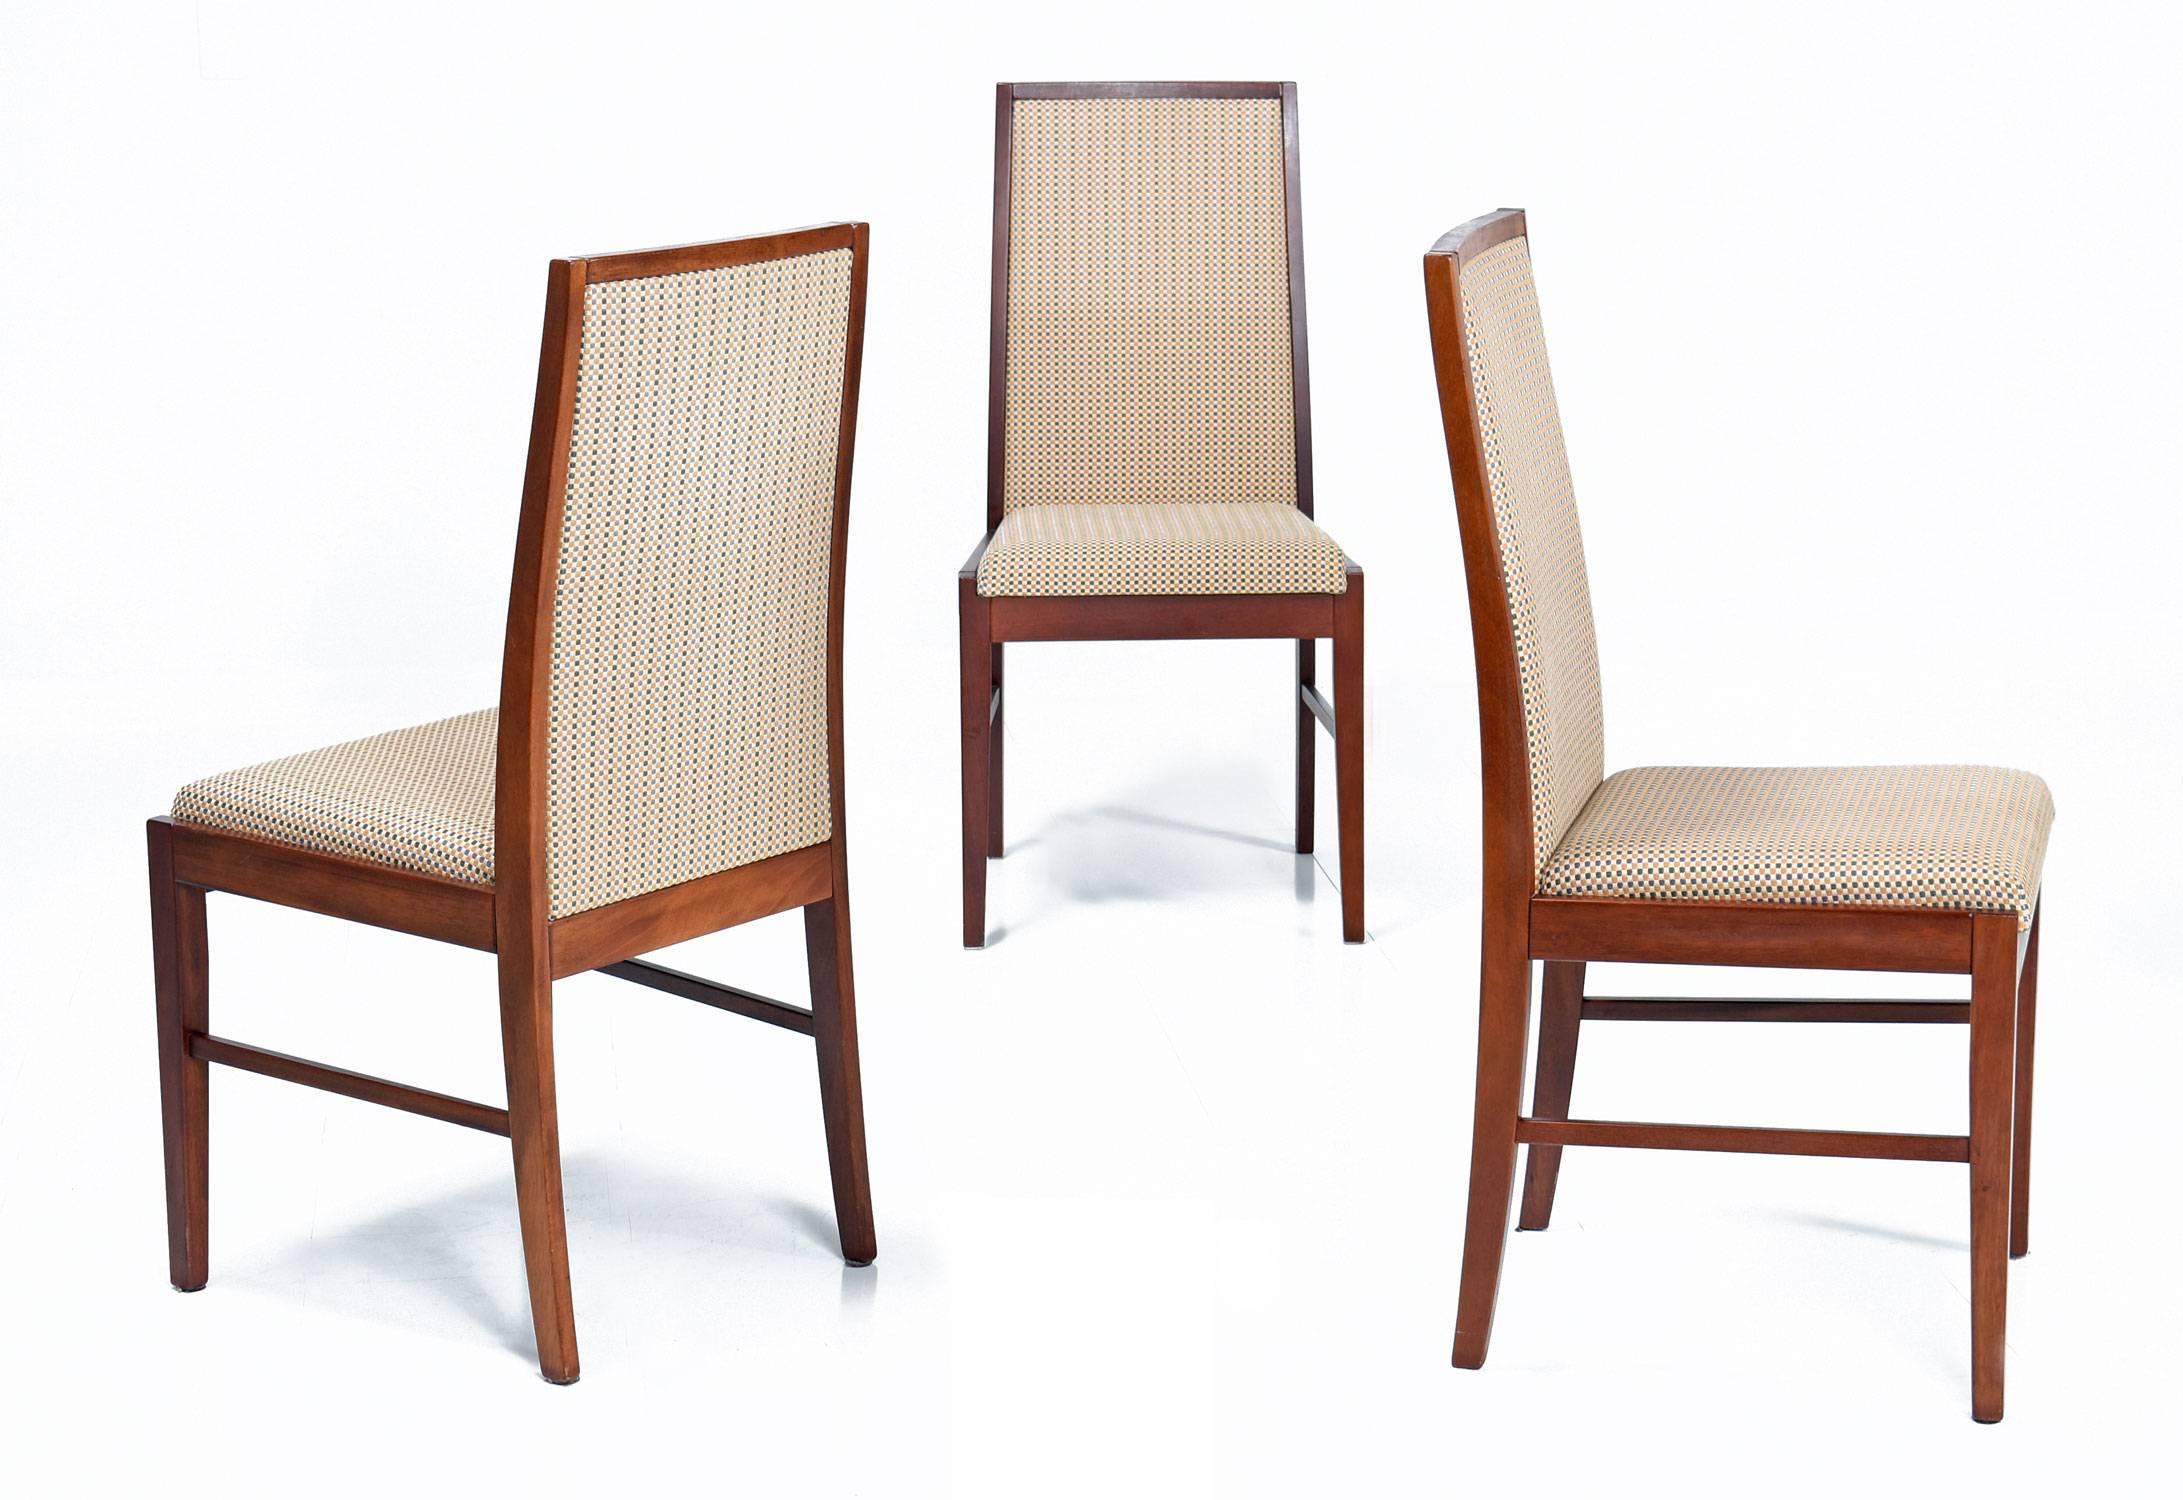 Set of eight Mid-Century Modern style rosewood dining chairs made by Skovby in the 1990s. This set of eight armless chairs features an upholstered high back chair, which slightly curves to offer gentle lumbar support. The chairs are fully